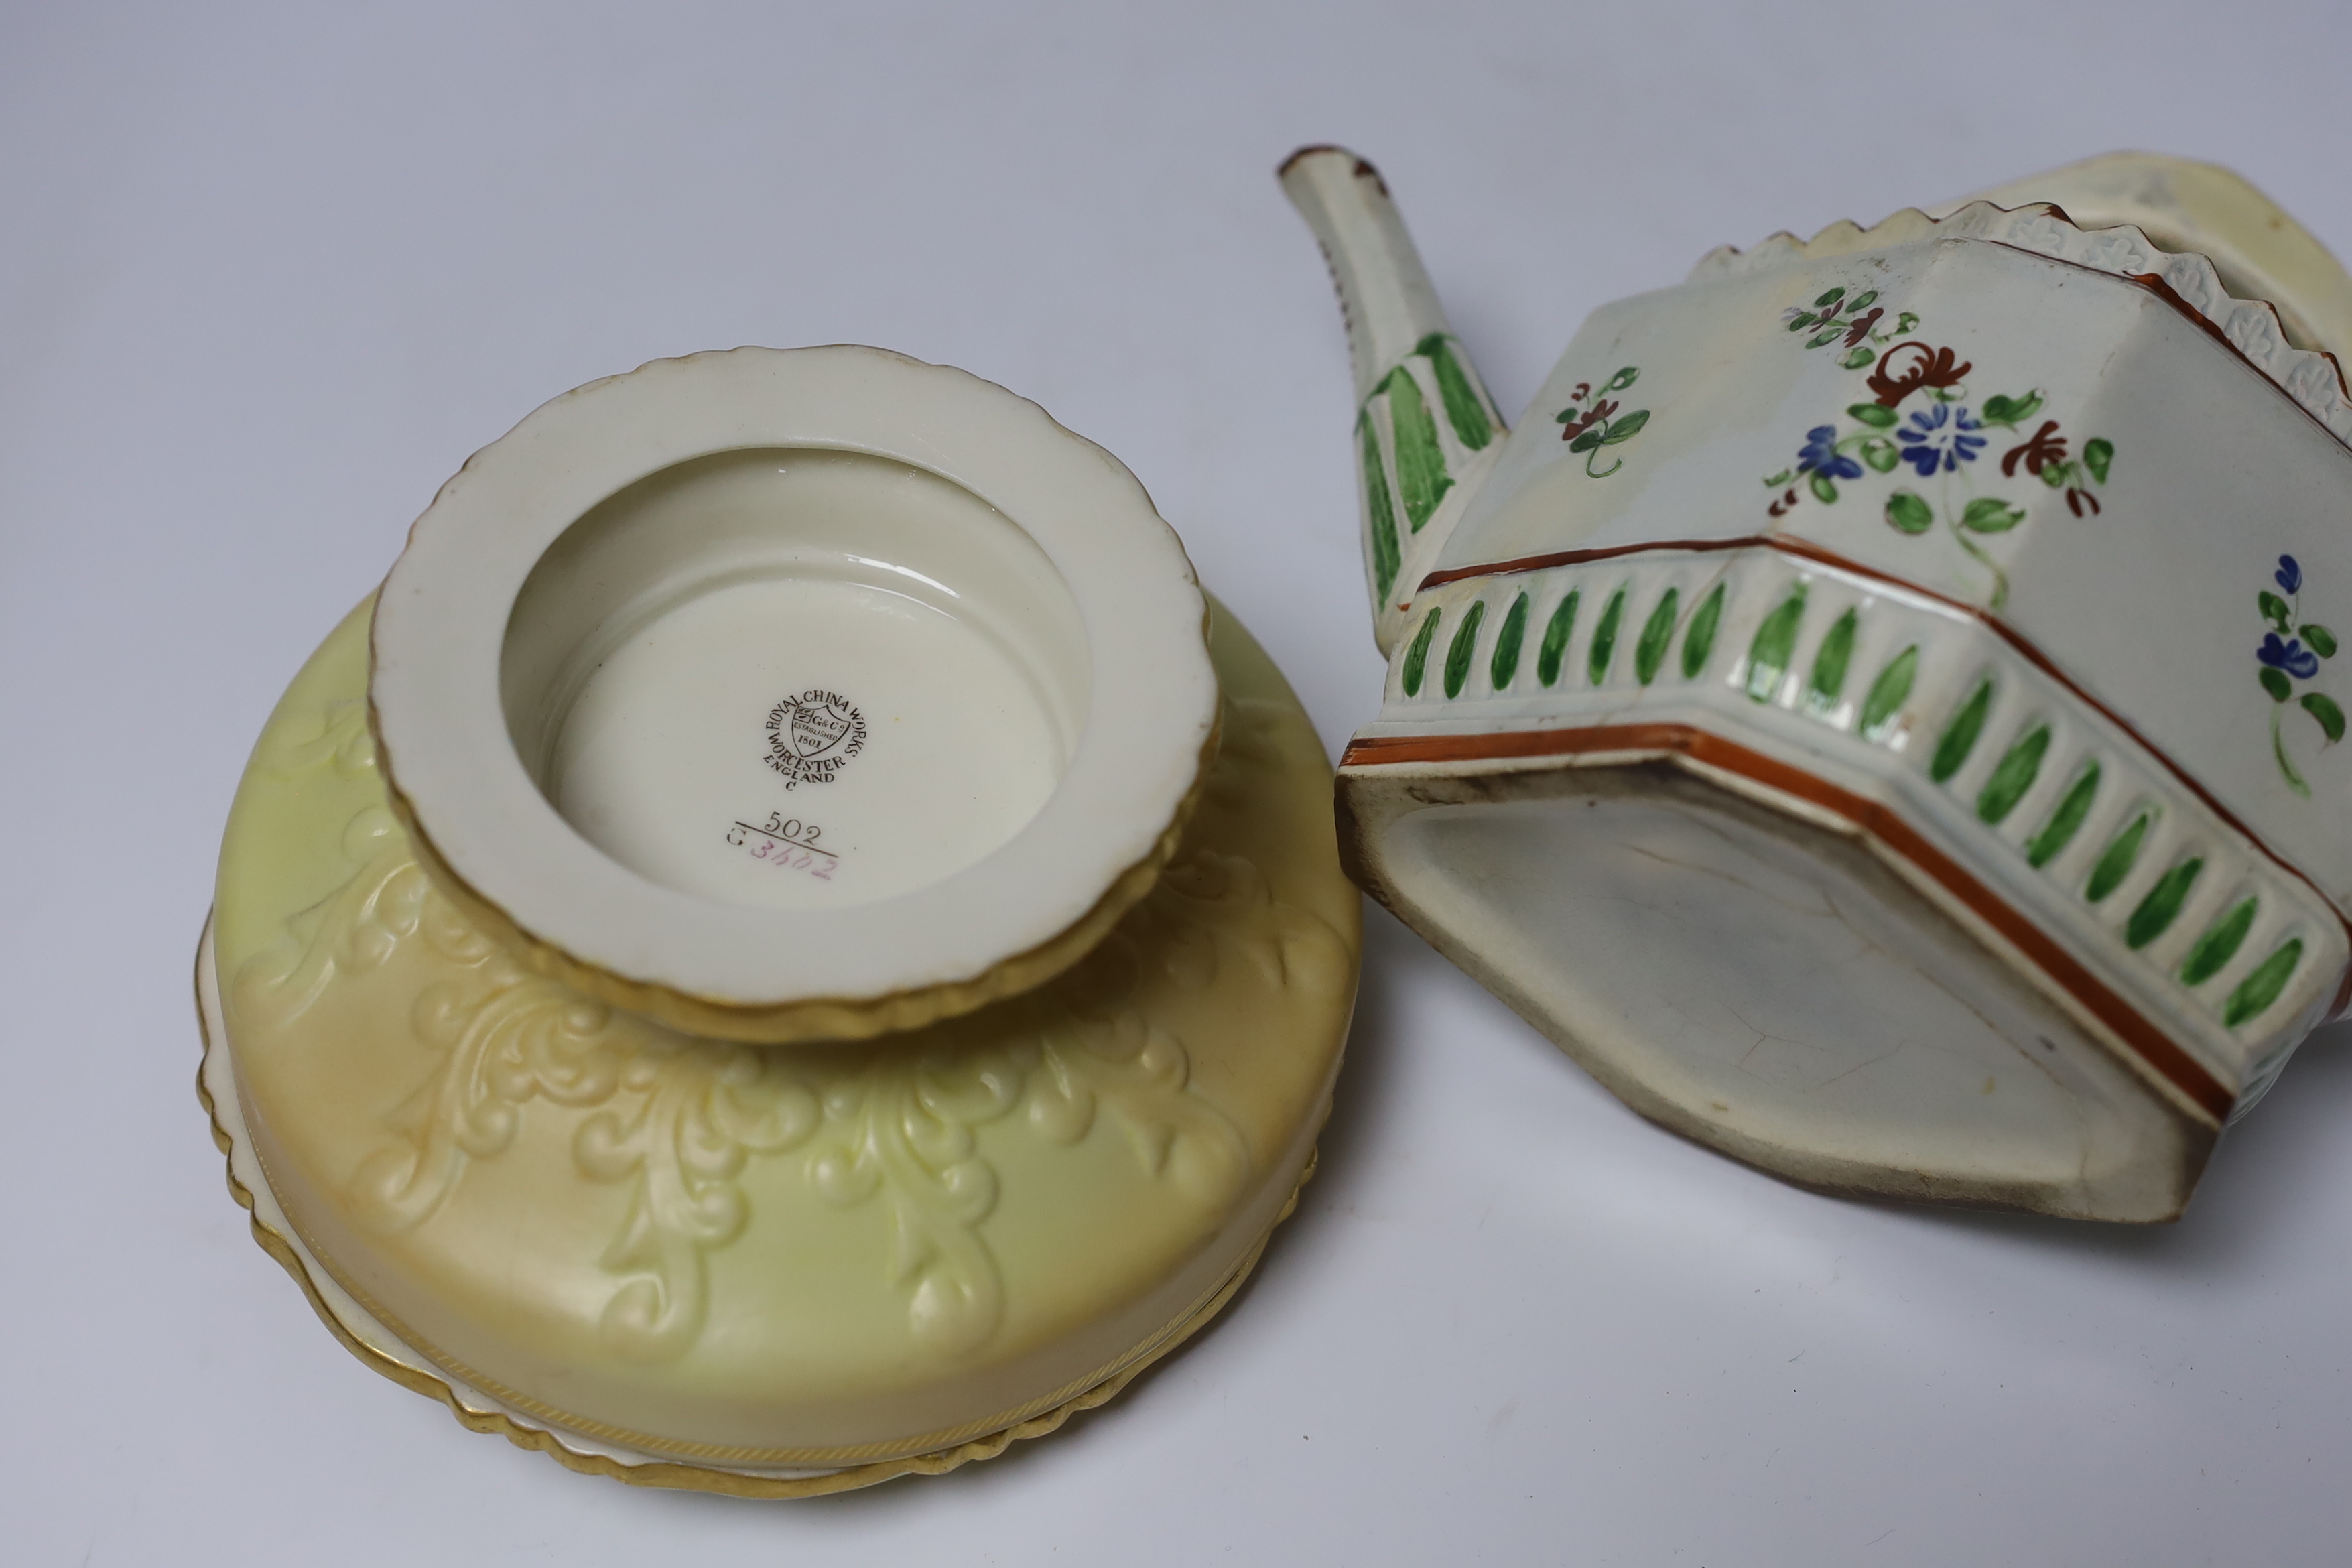 Three pieces of Royal Worcester blush ivory porcelain and an early 19th century pearlware teapot, tallest 19cm